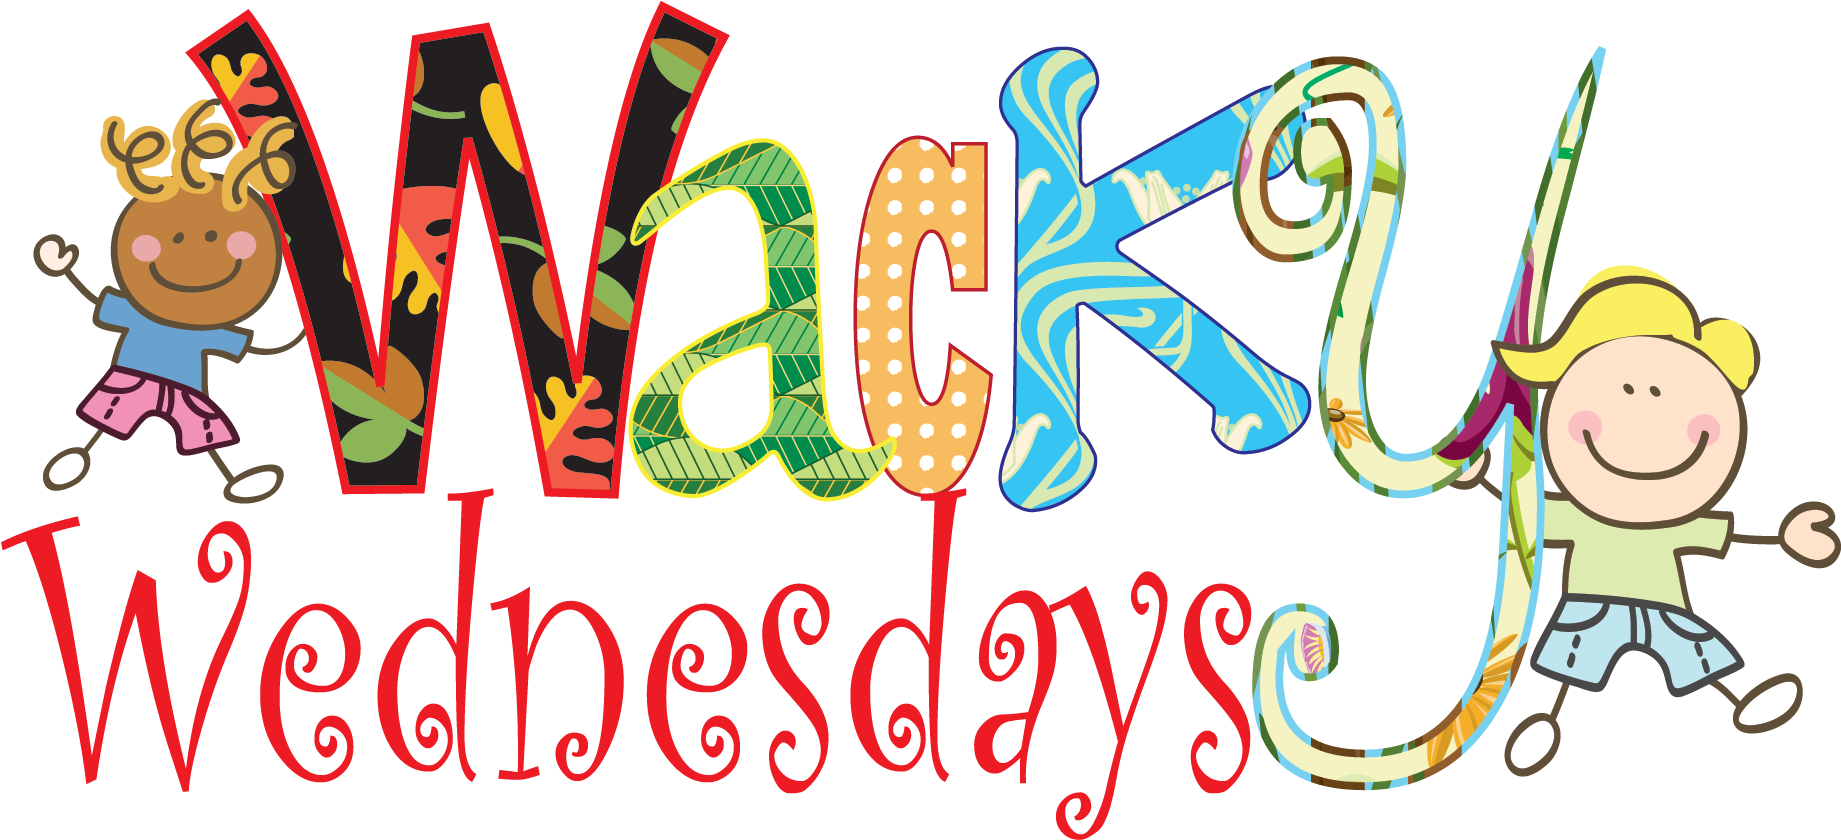 Wacky Wednesday Free Clipart - Love You Forever And Always (1840x892)